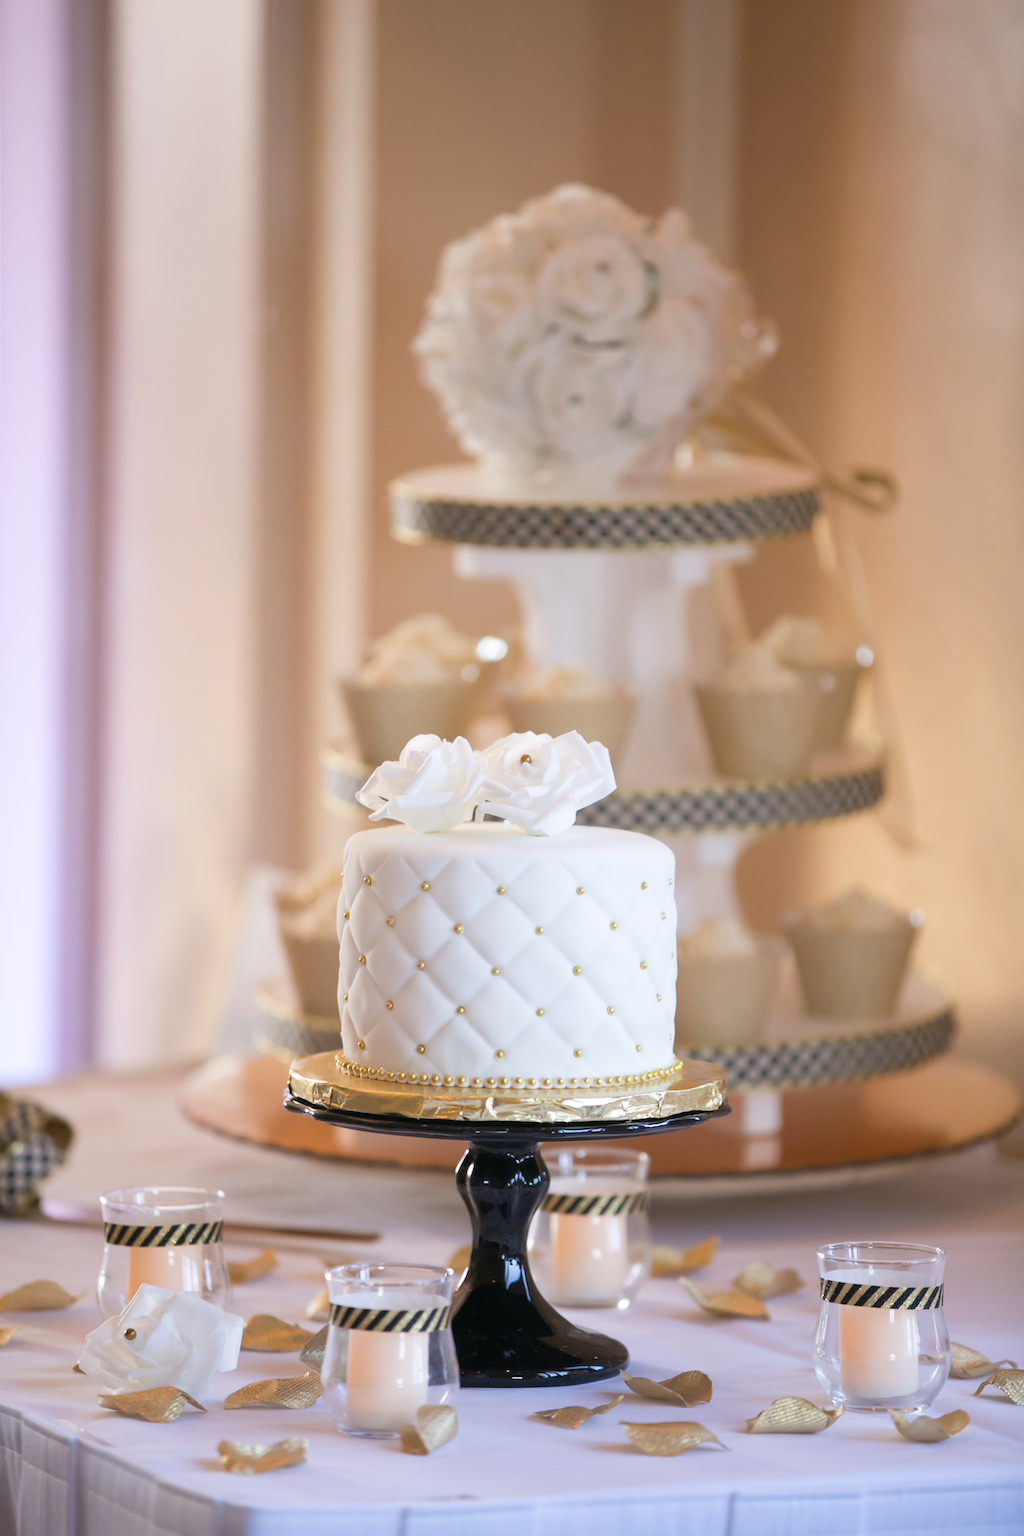 One-Tiered White Quilted Bling Rhinestone Wedding Cake with White Rose Topper on Black Cake Stand | Sarasota Wedding Photographer Carrie Wildes Photography